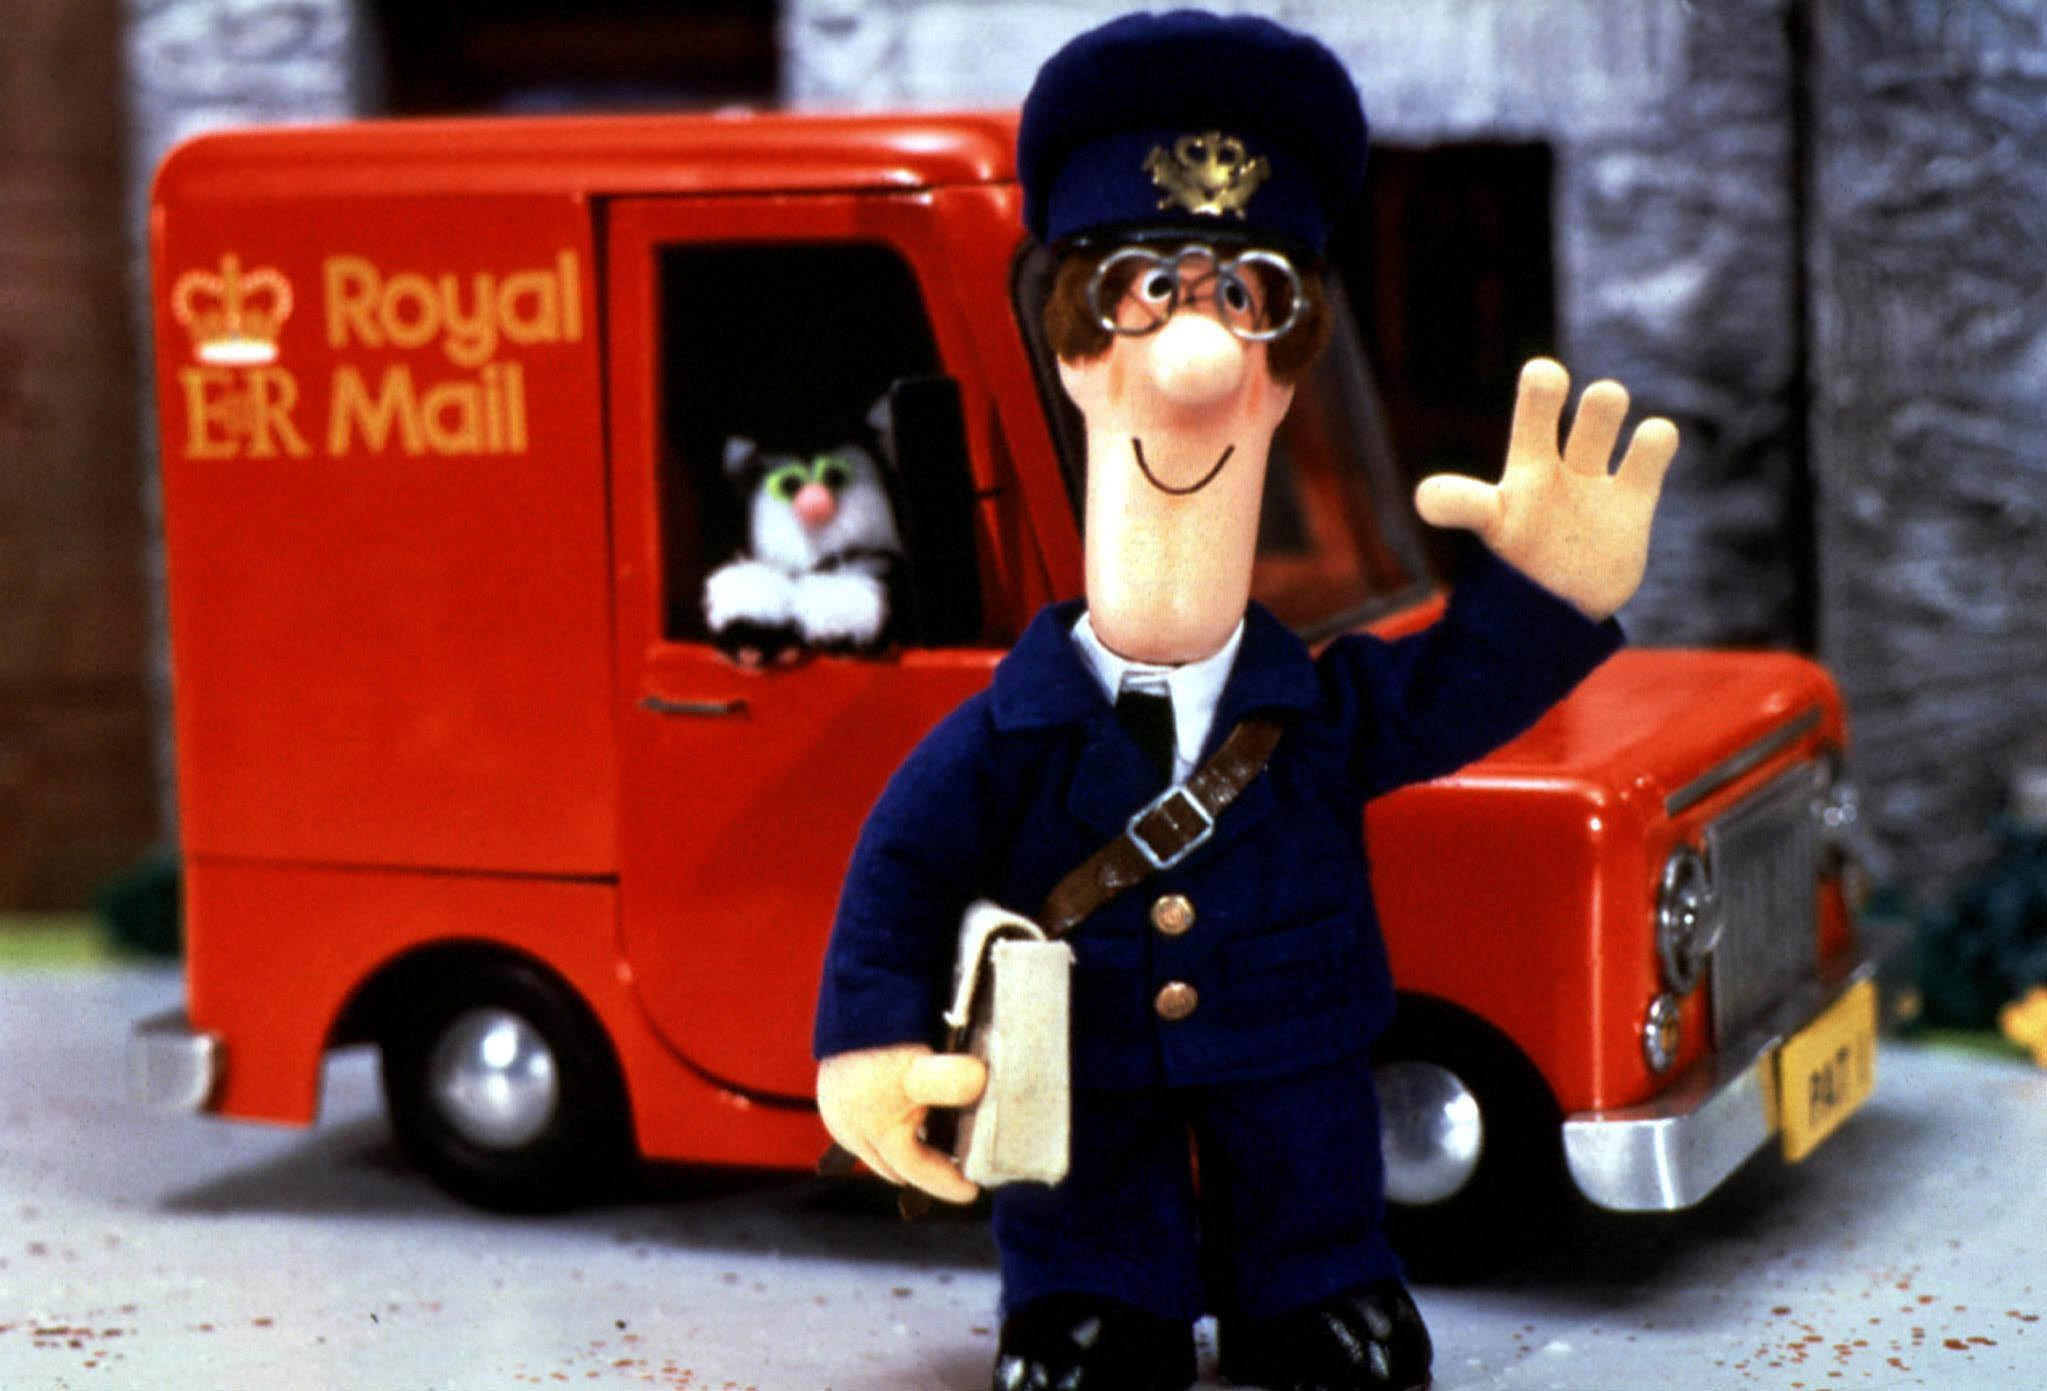 Postman Pat and his black and white cat Jess.